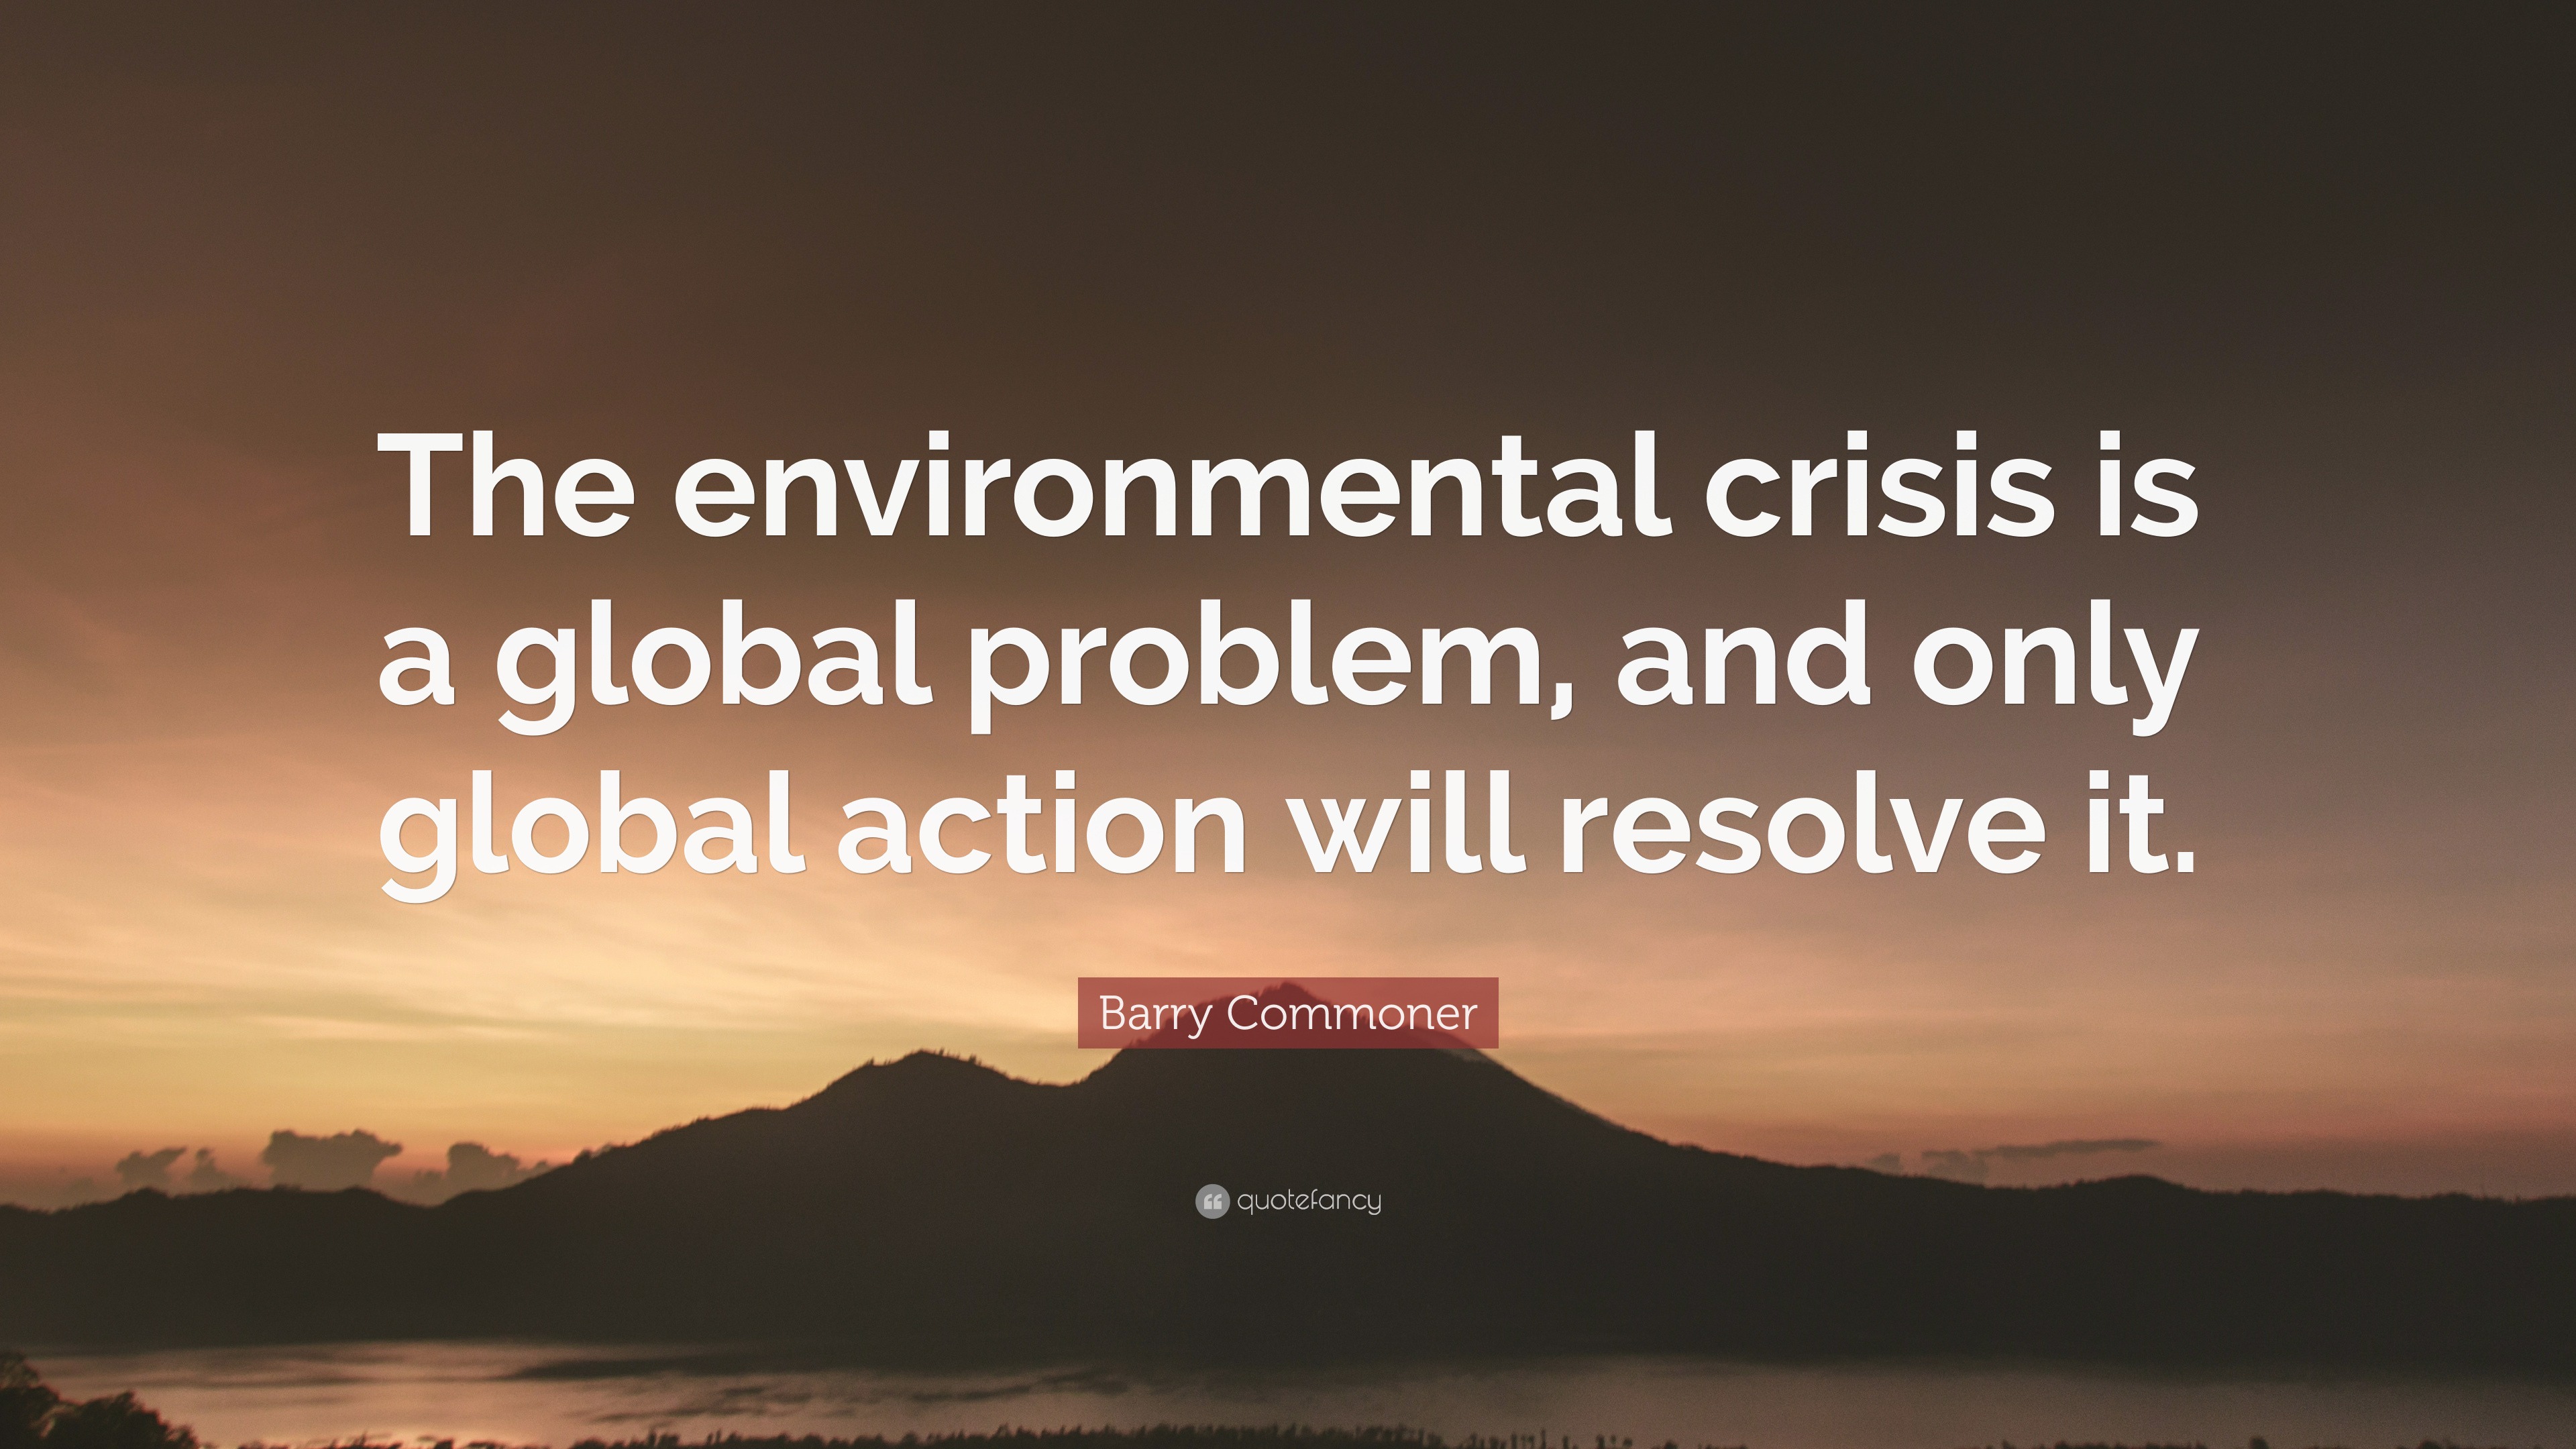 4441431 Barry Commoner Quote The environmental crisis is a global problem